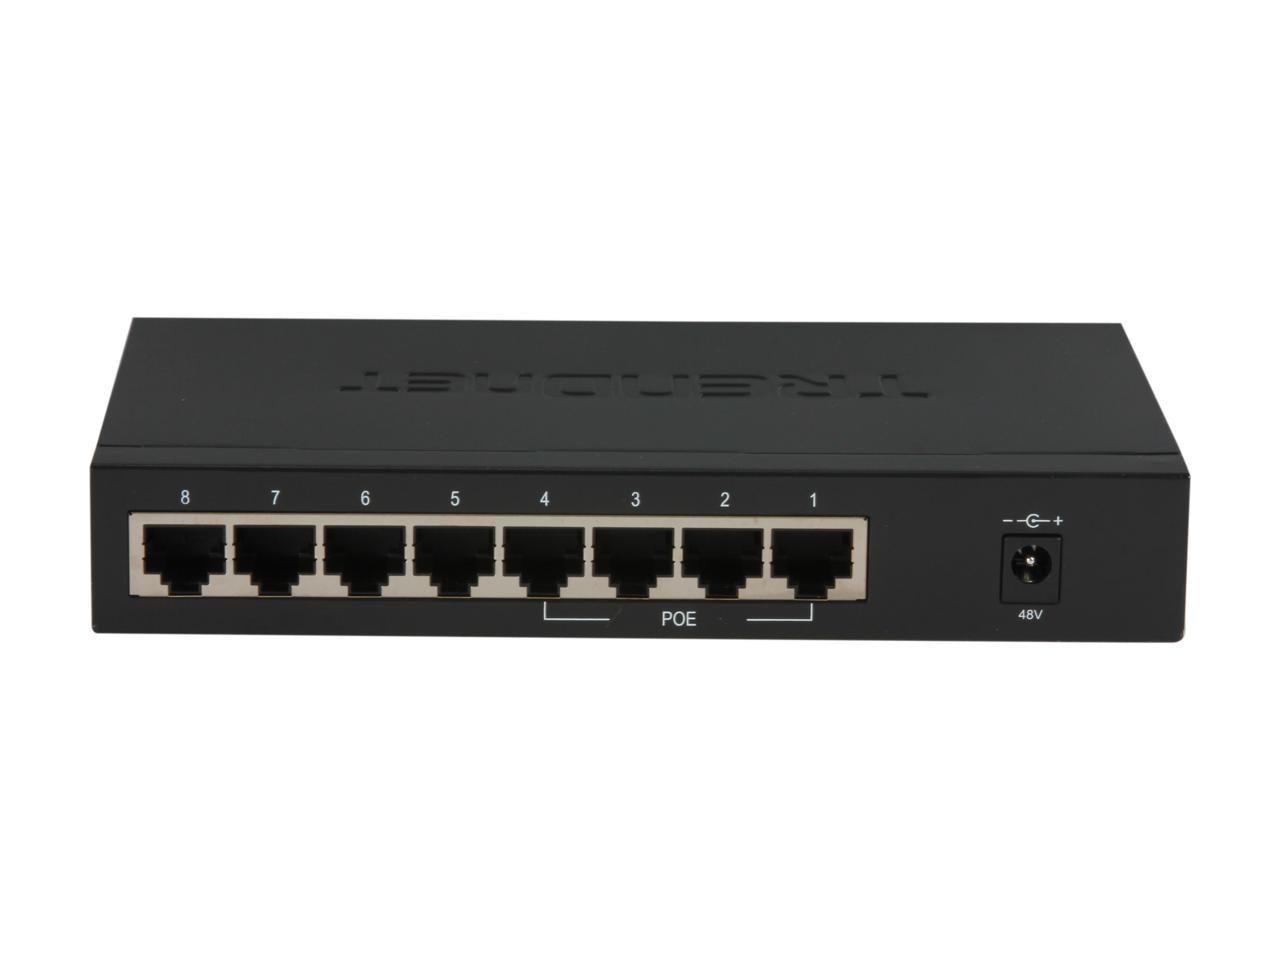 TRENDnet TPE-S44 Unmanaged Switch. Limited Life Time Warranty